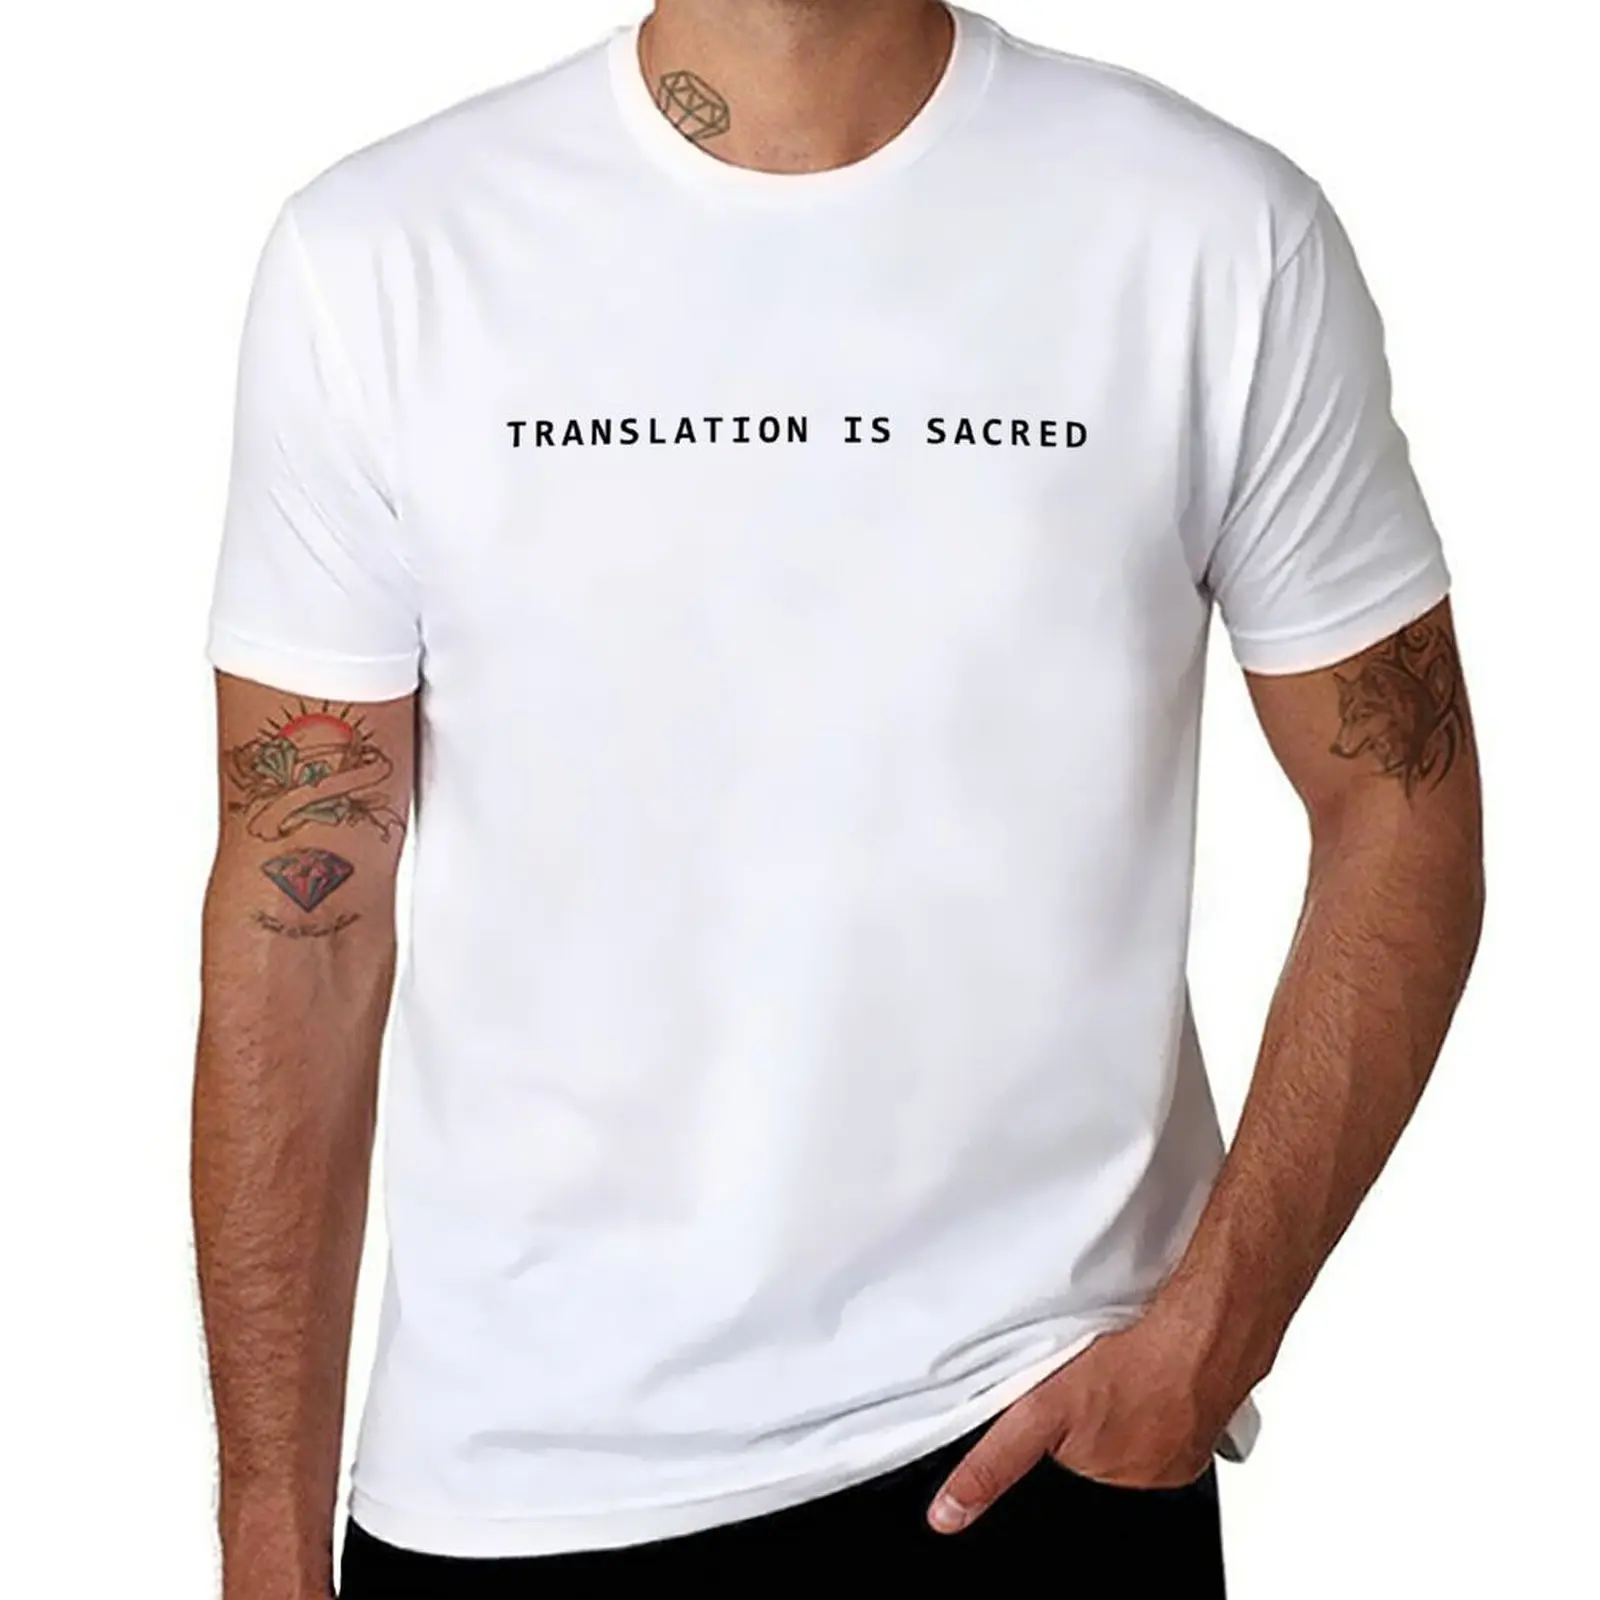 

Translation is sacred T-Shirt sublime summer tops vintage clothes plain heavyweight t shirts for men